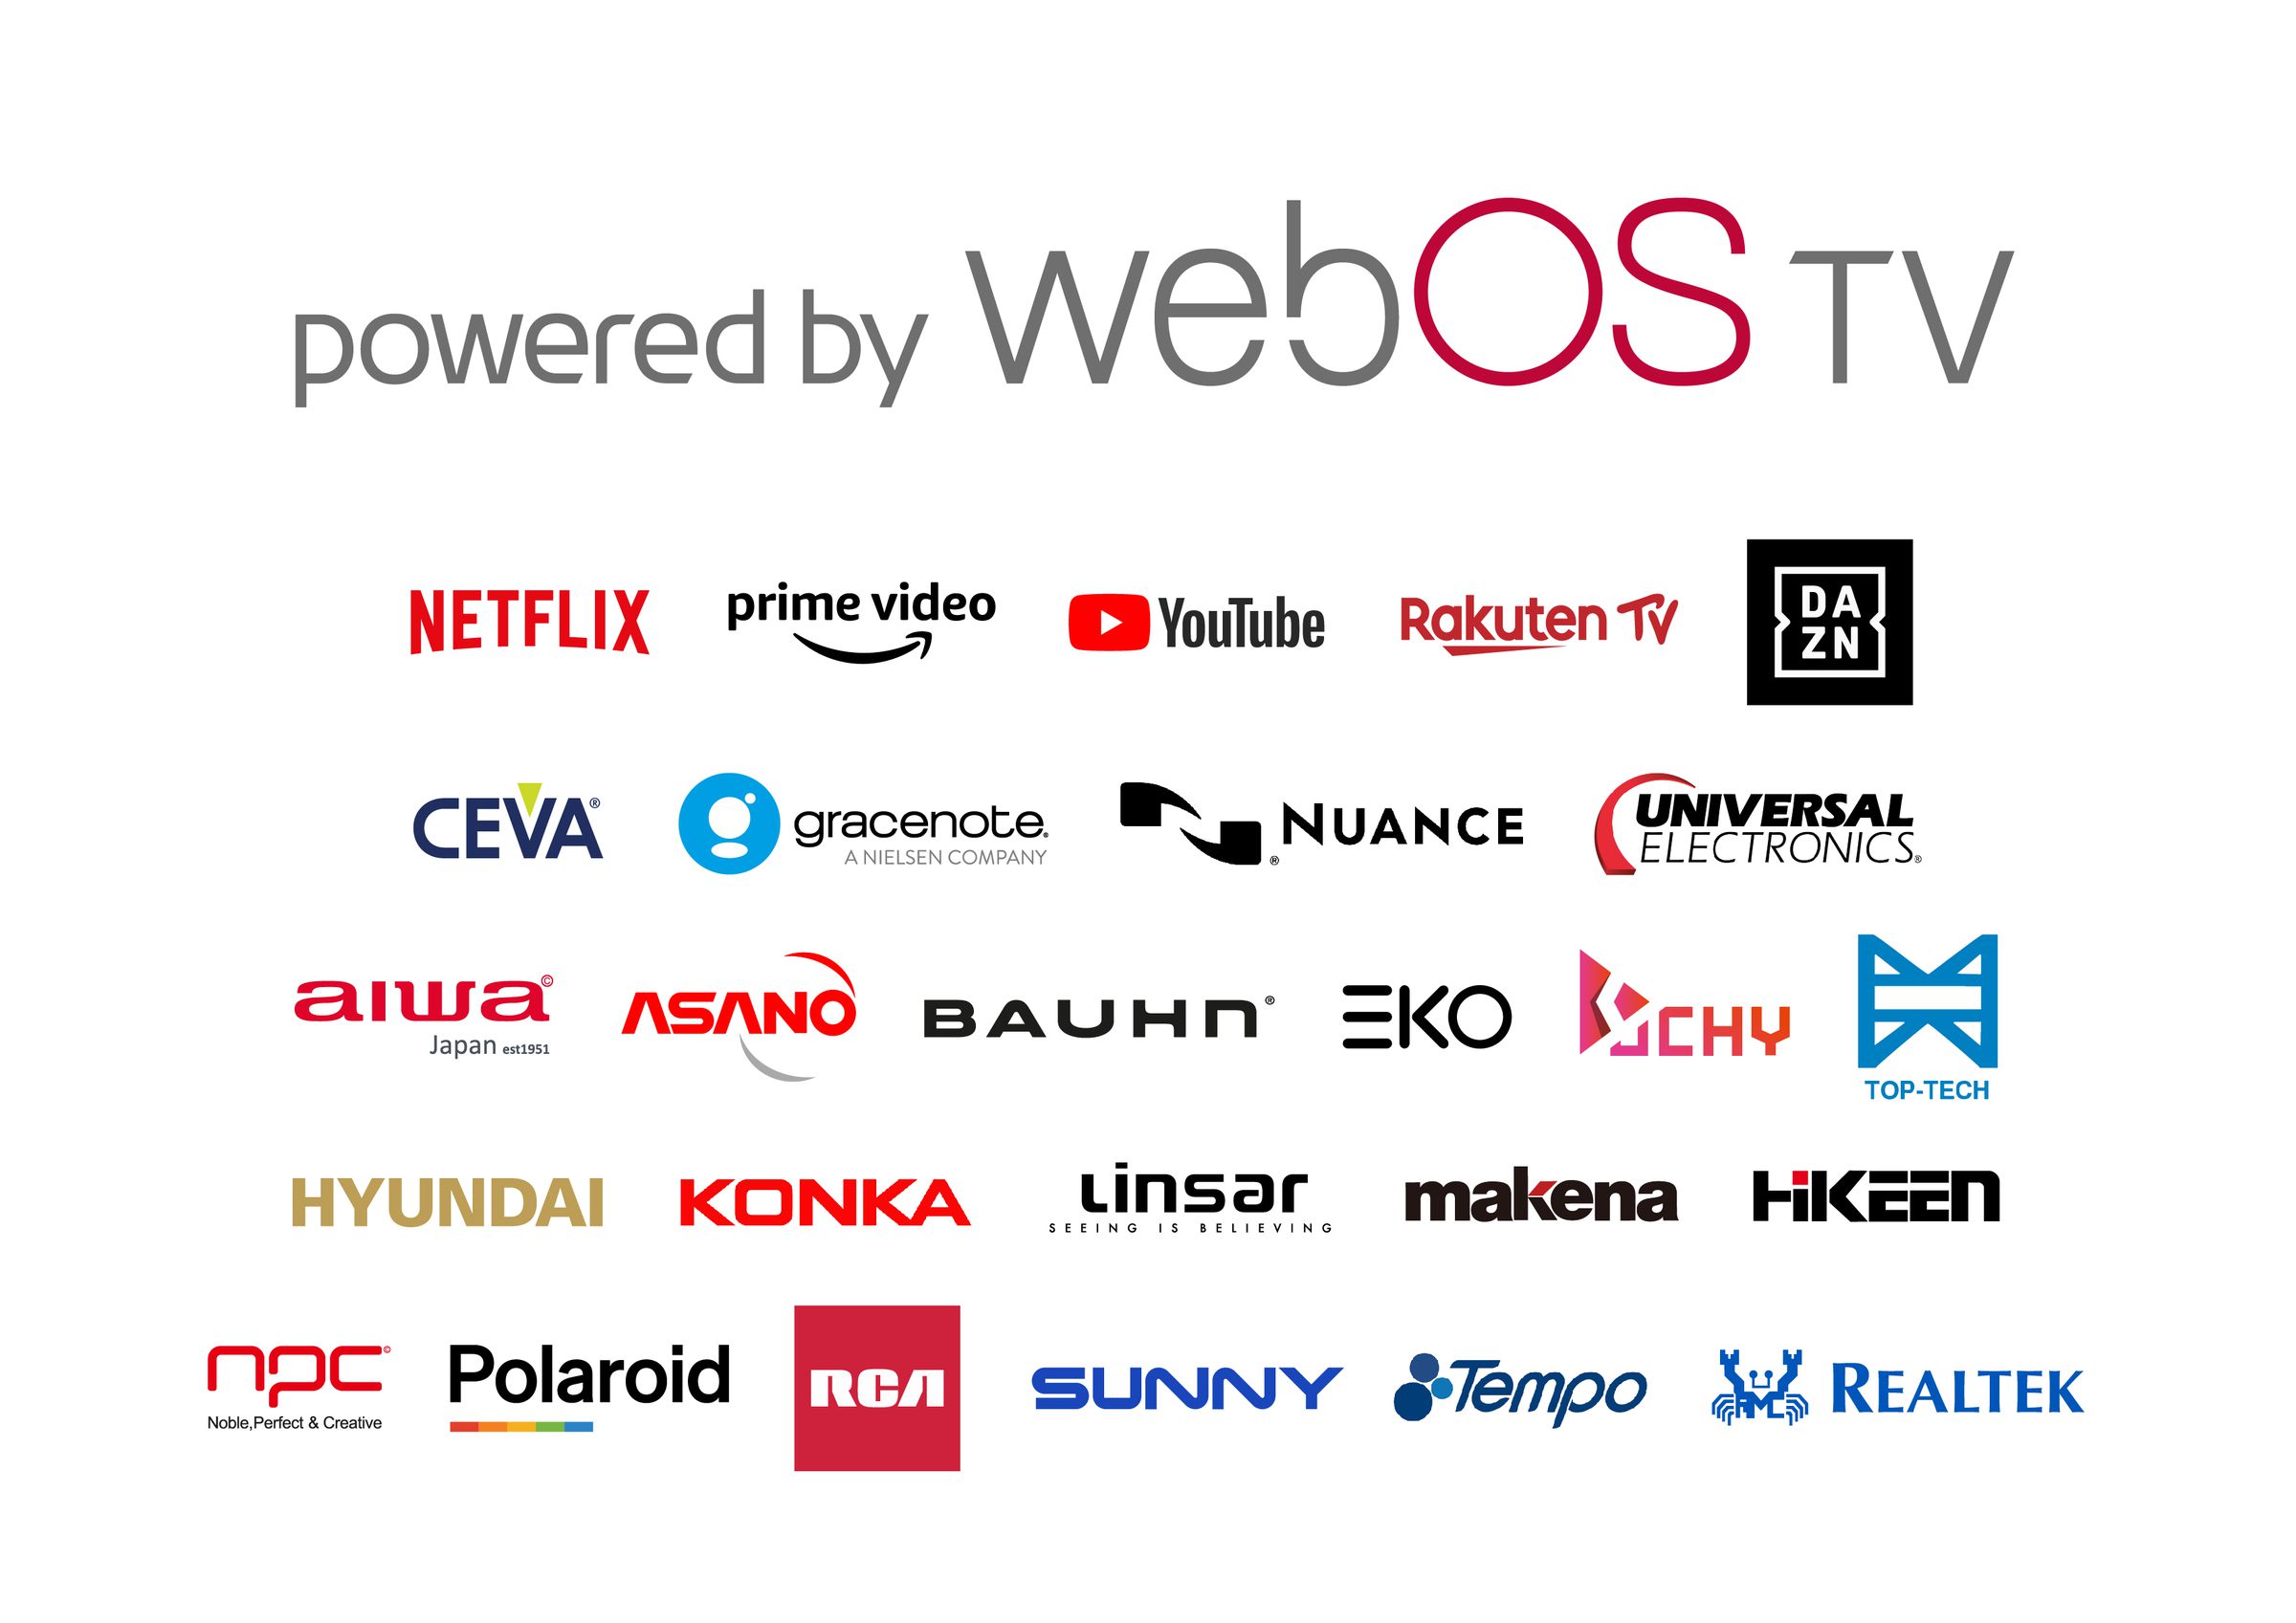 LG has already lined up a number of partners for “powered by webOS” TVs.